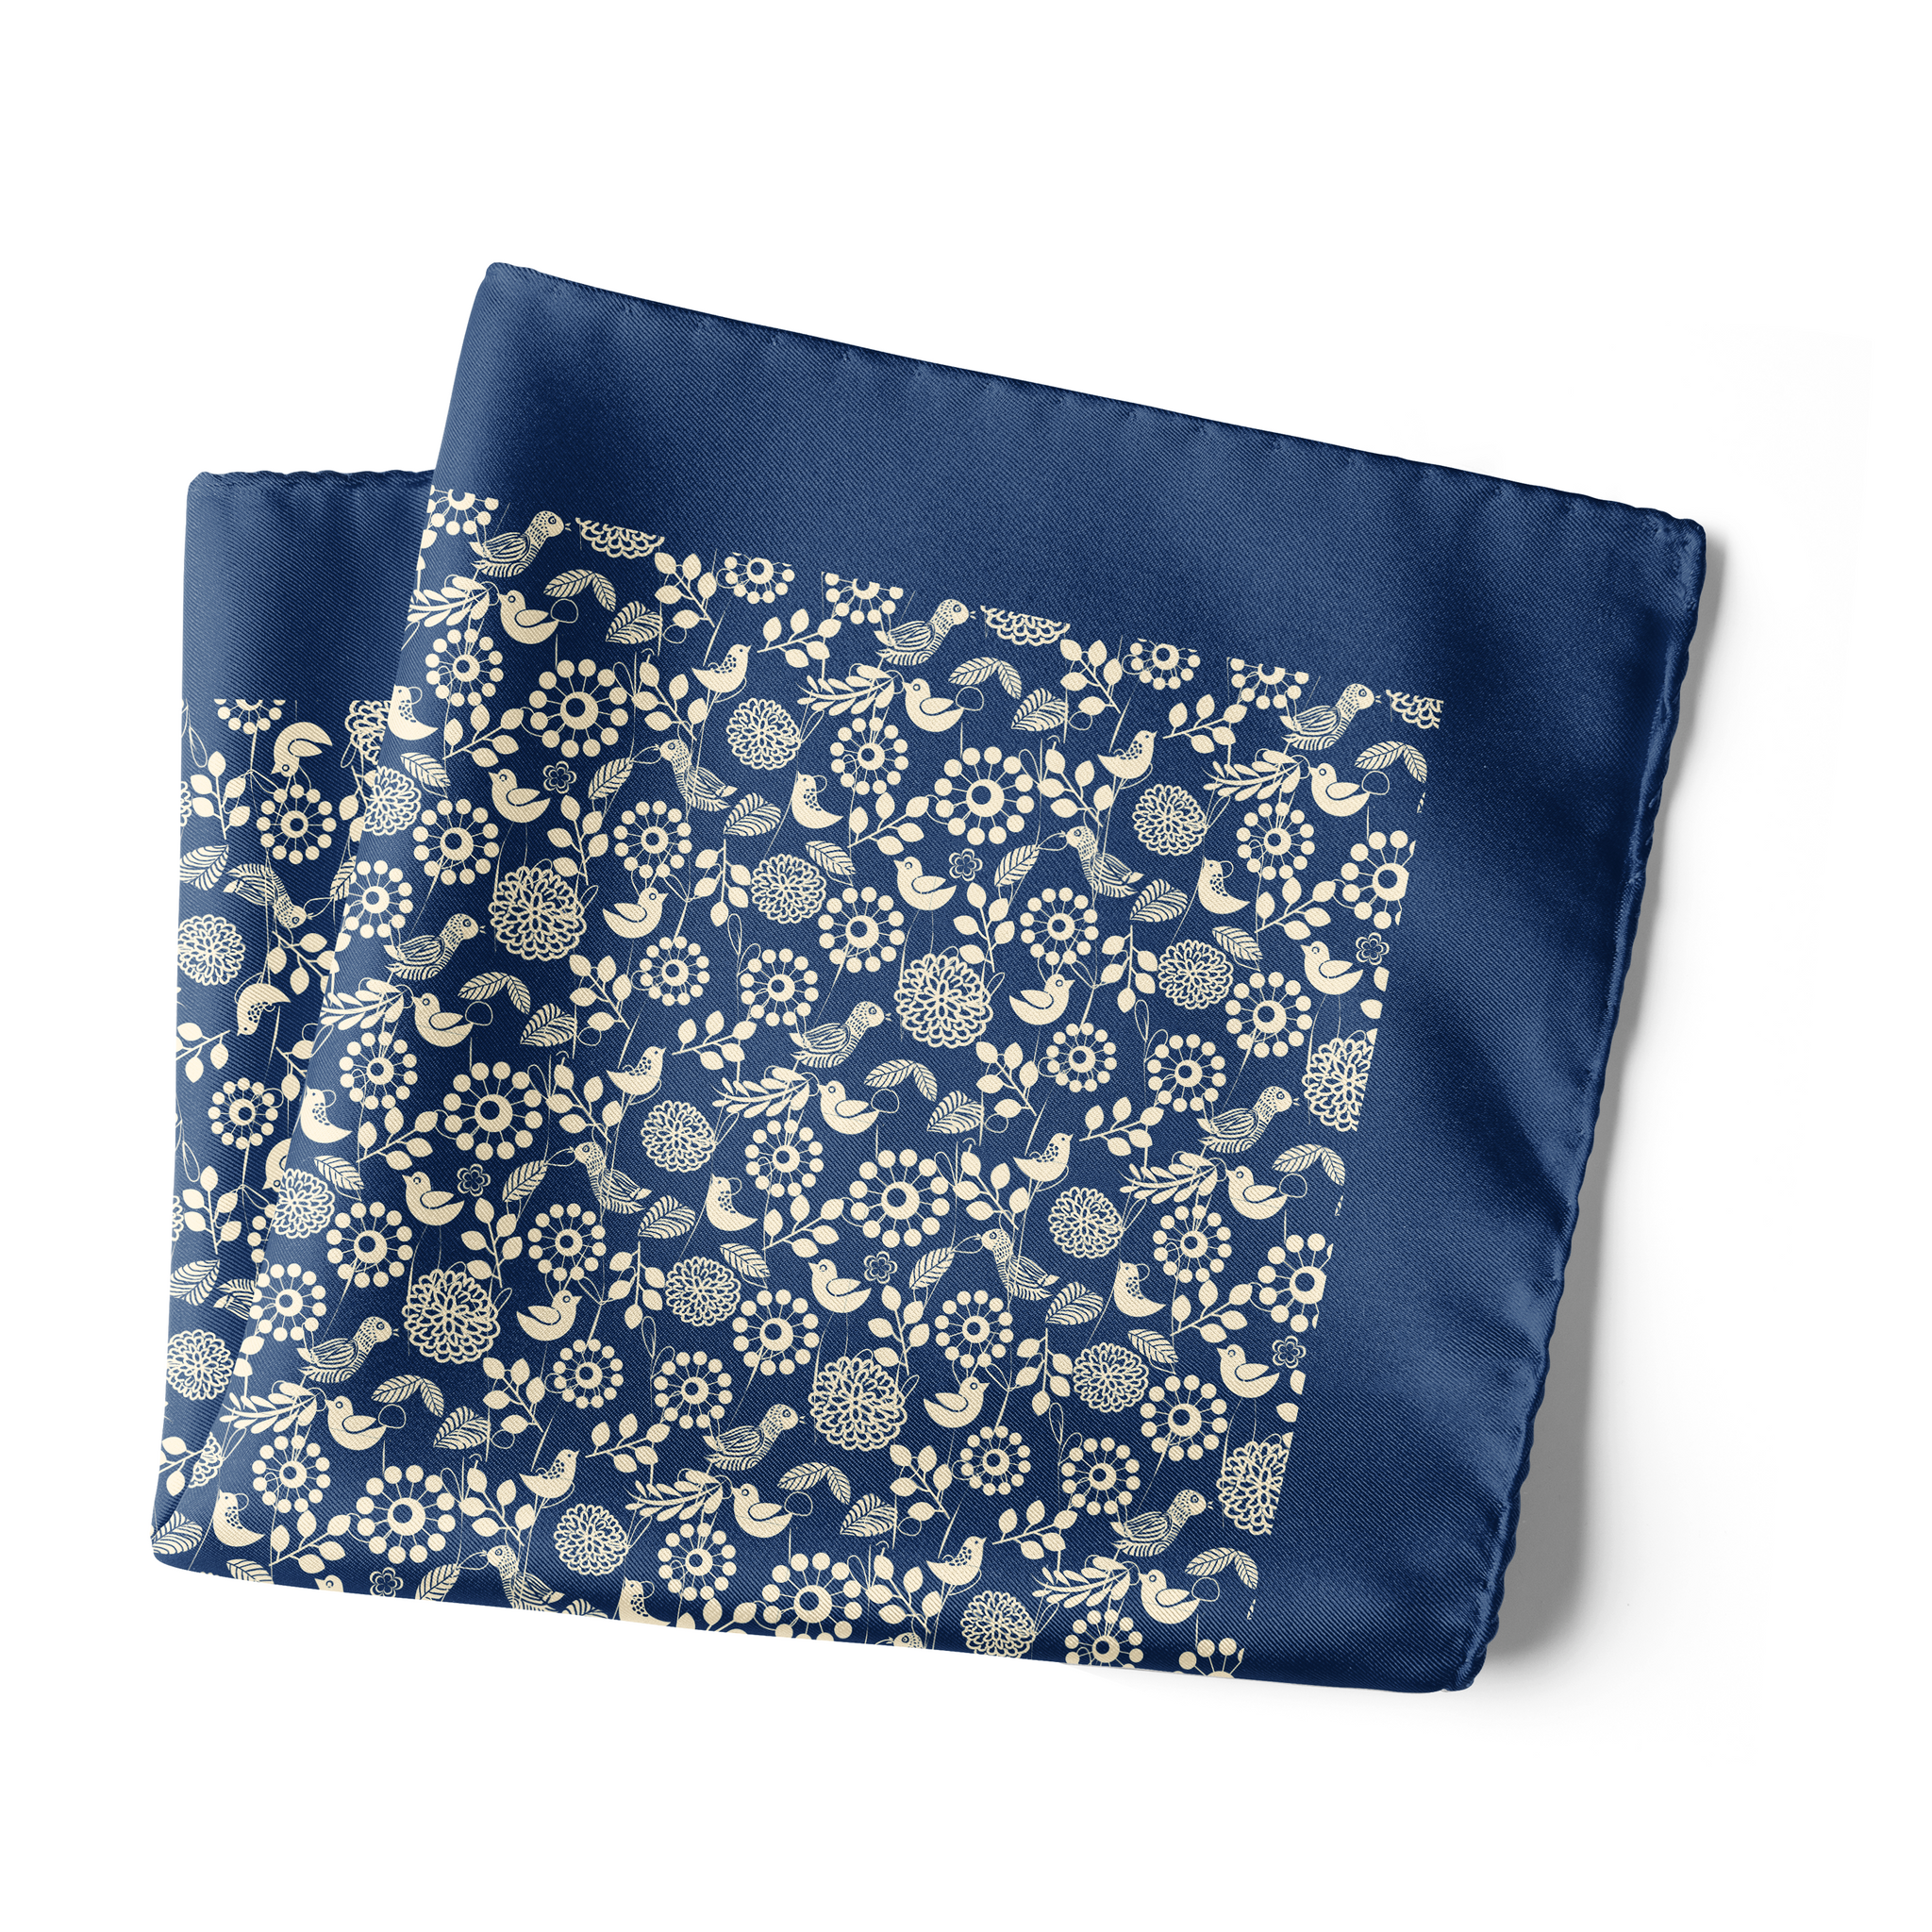 Chokore Blue and white Satin Silk pocket square from the Wildlife Collection